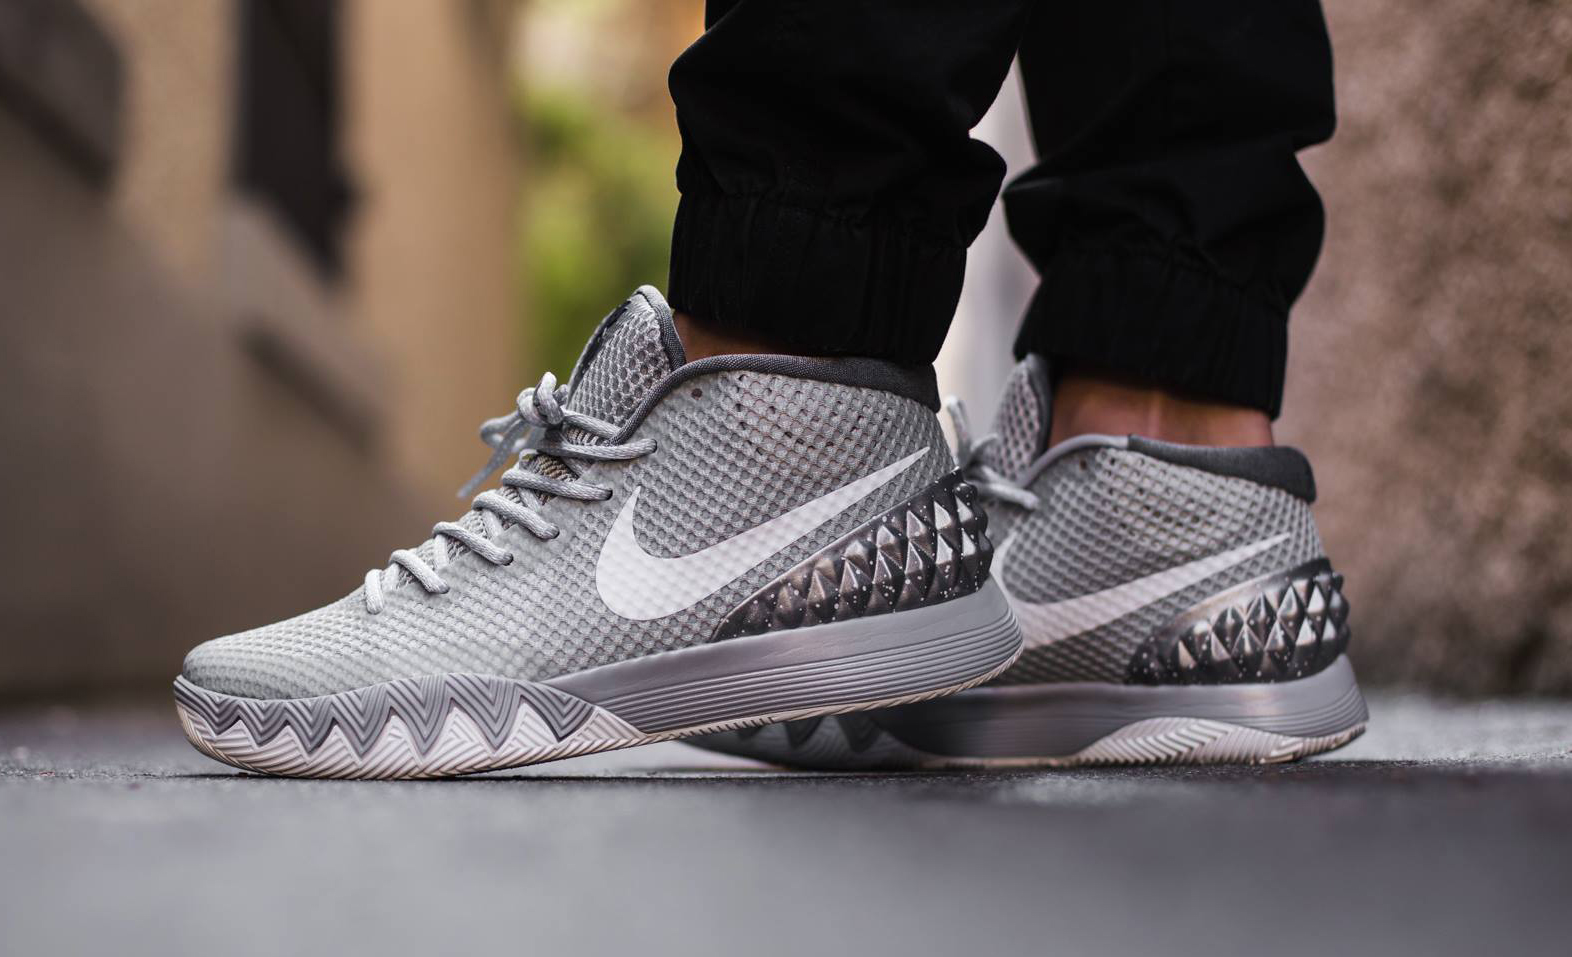 See How the 'Wolf Grey' Nike Kyrie 1 